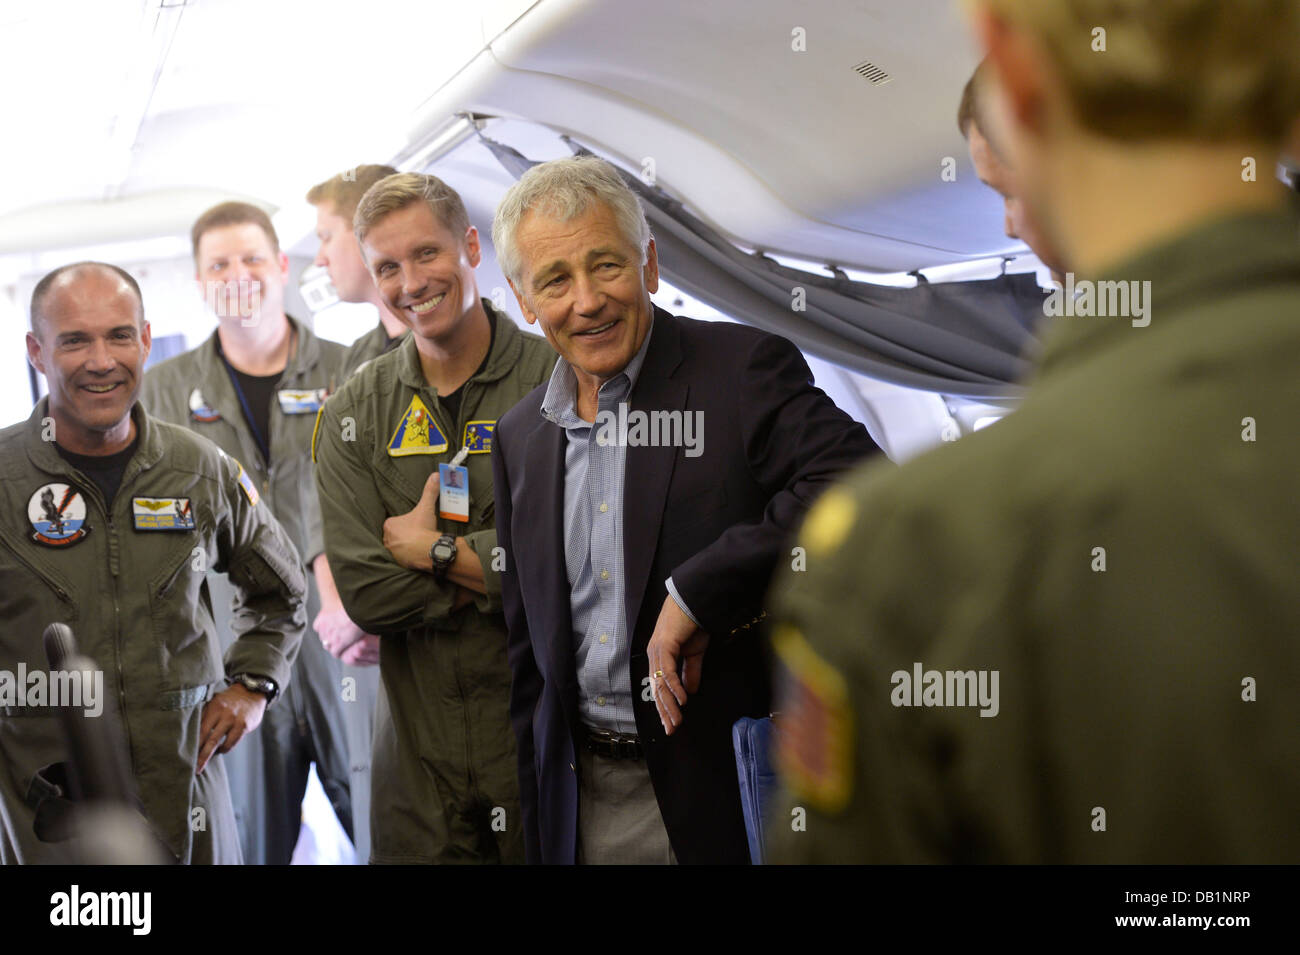 Secretary of Defense Chuck Hagel, center, tours the interior of a U.S. Navy P-8 Poseidon aircraft assigned to Patrol Squadron (VP) 30 July 16, 2013, at Naval Air Station Jacksonville, Fla. Hagel was on a three-day trip to visit several installations on th Stock Photo